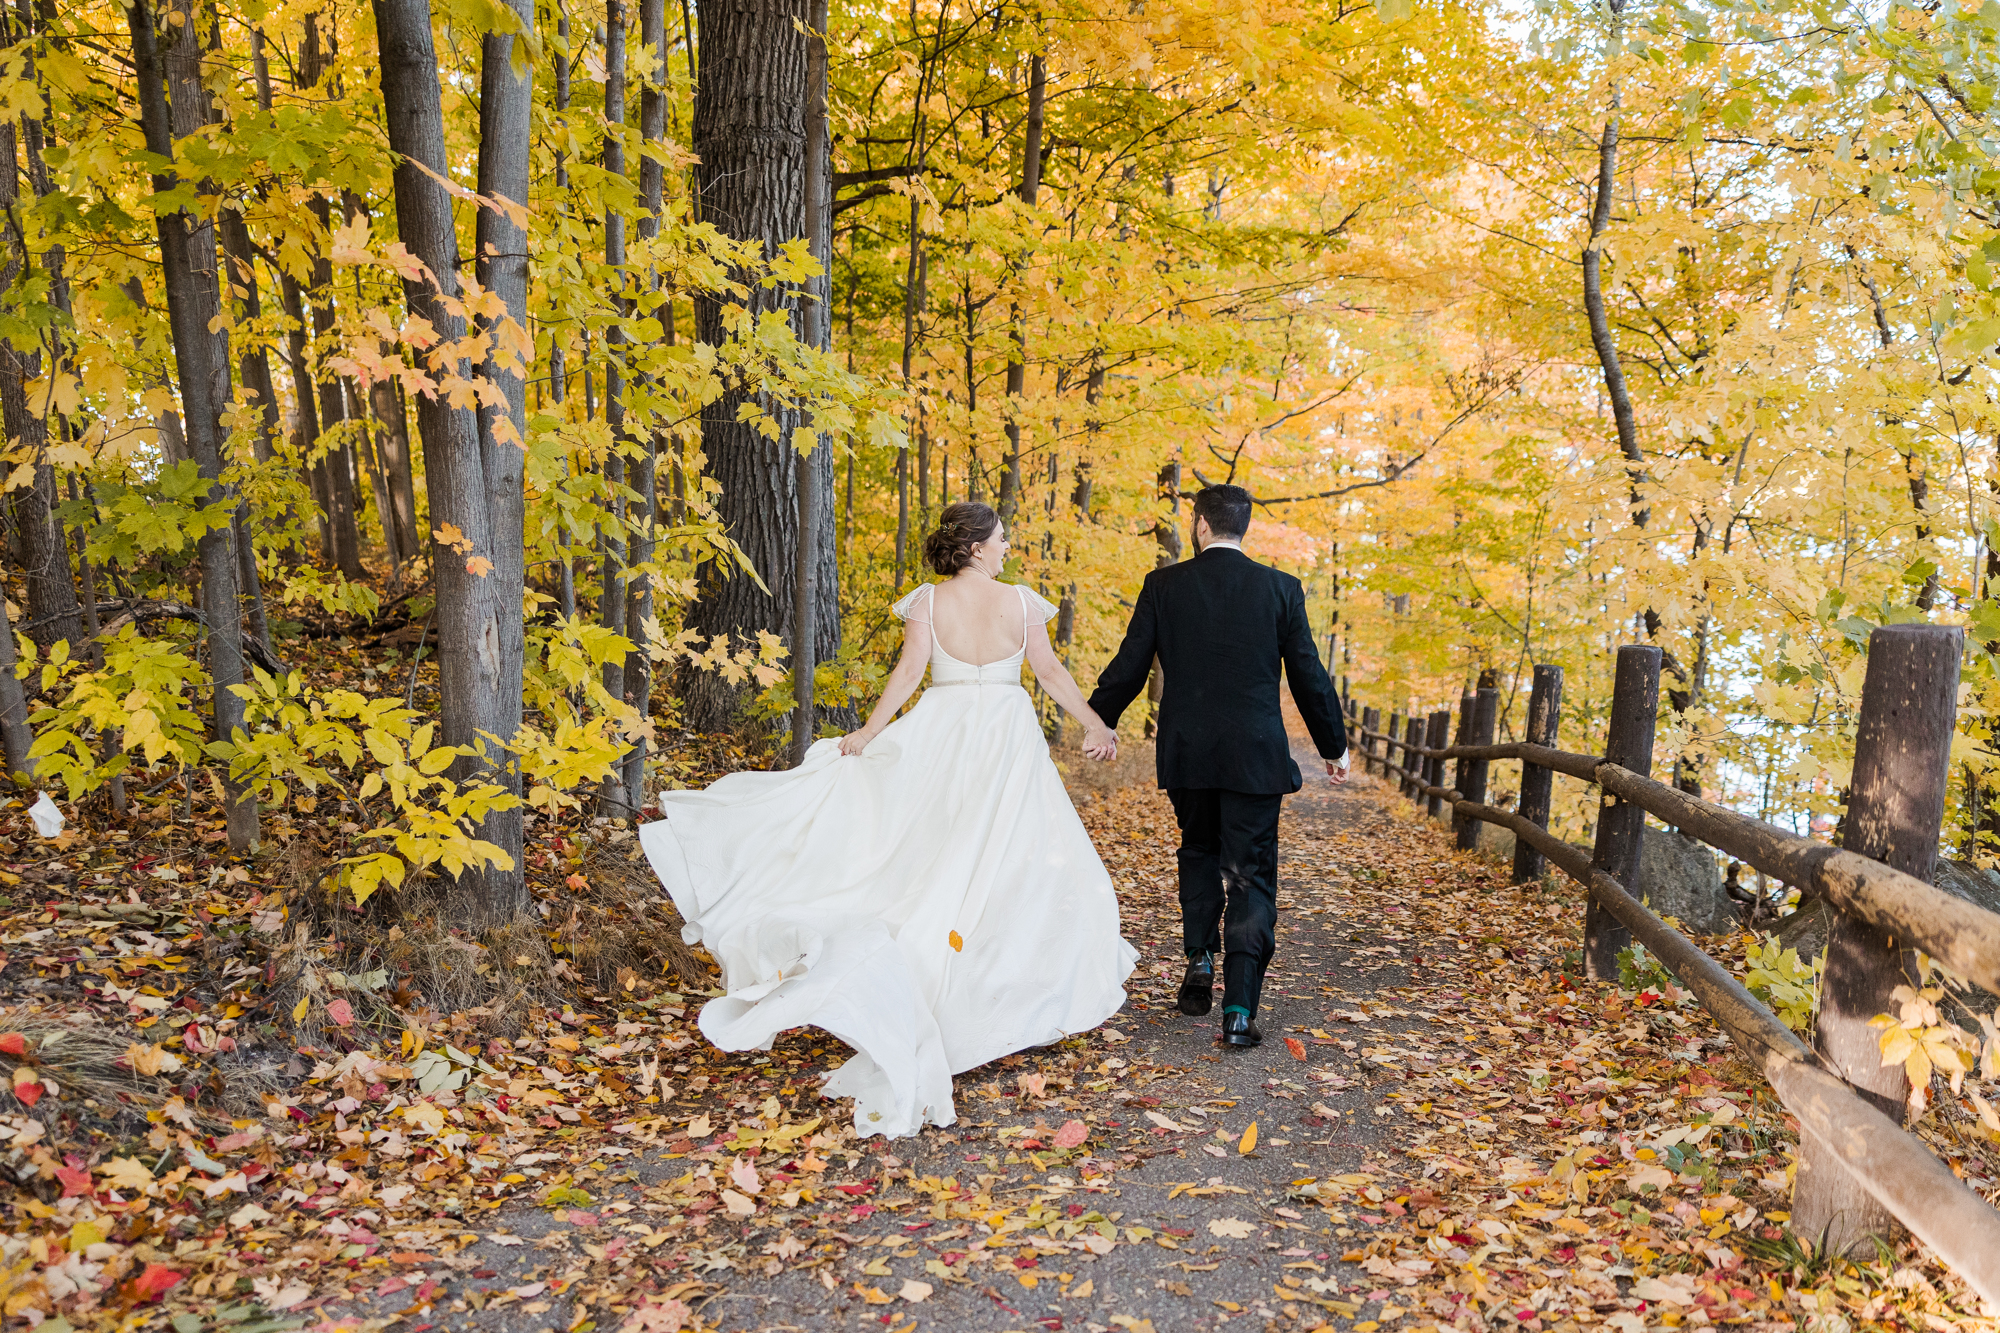 Authentic Gate House Wedding in Fall